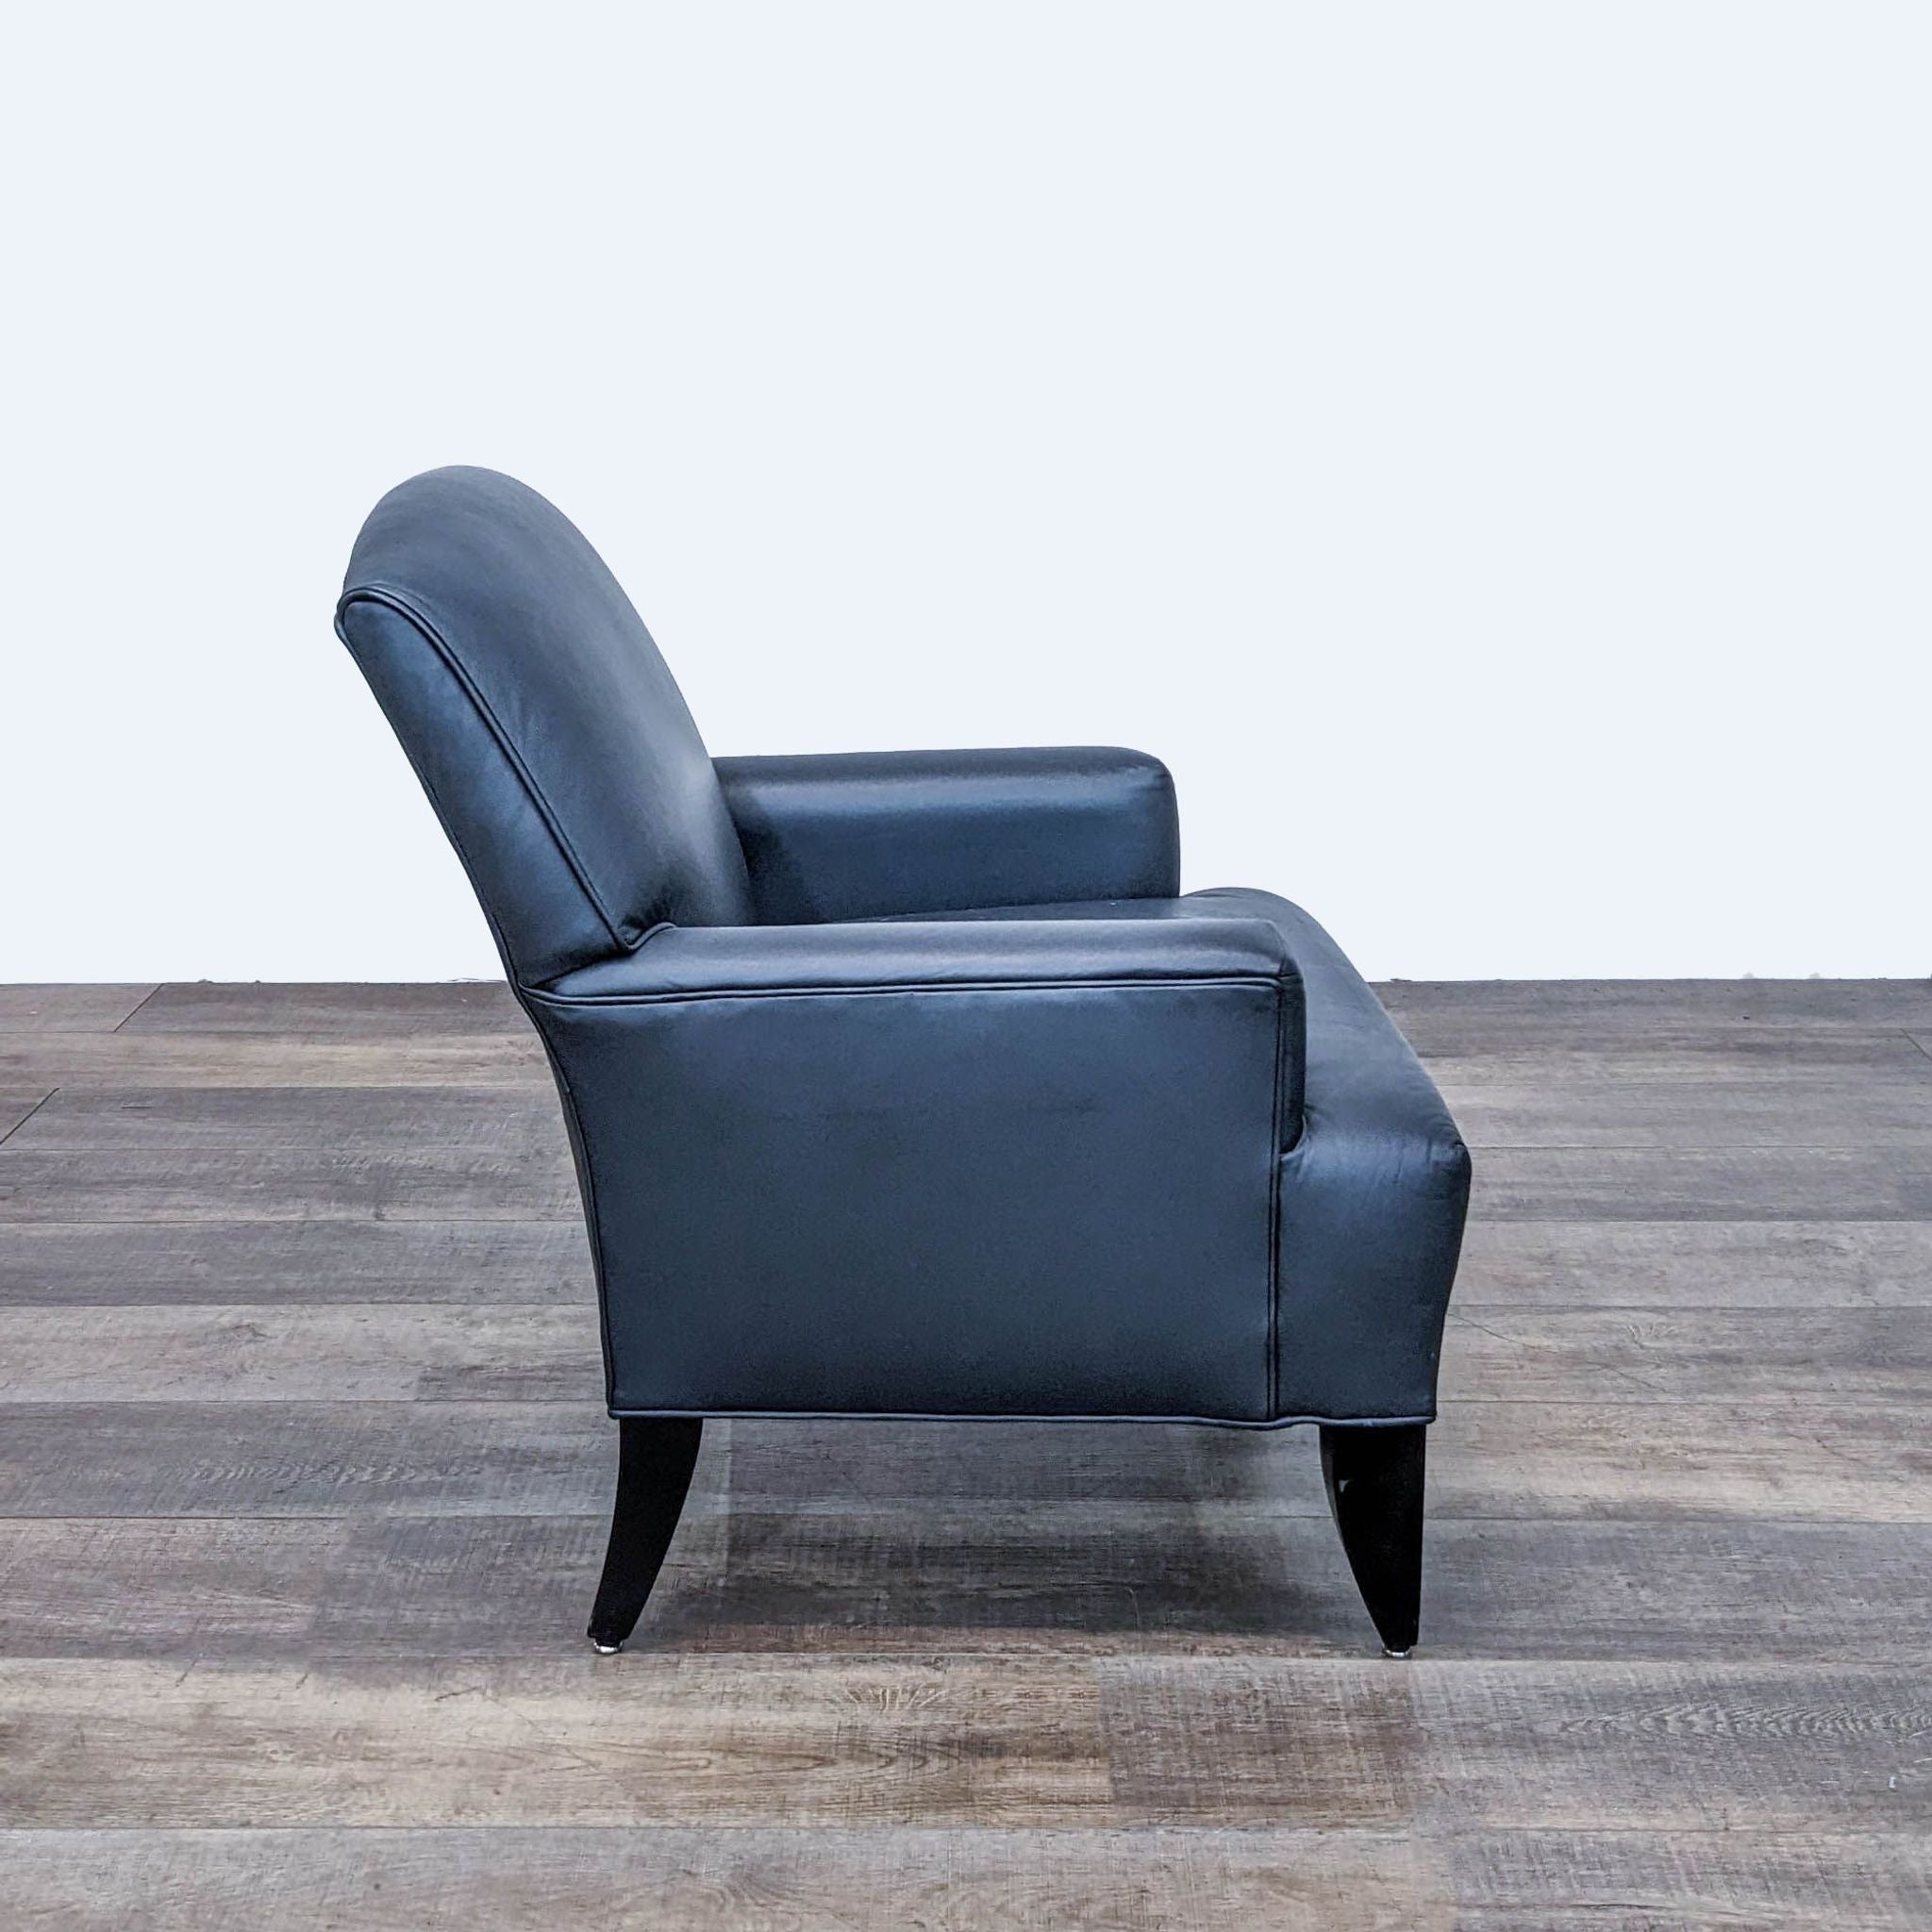 Side angle view of Reperch navy leather lounge chair with curved backrest and dark wooden legs.